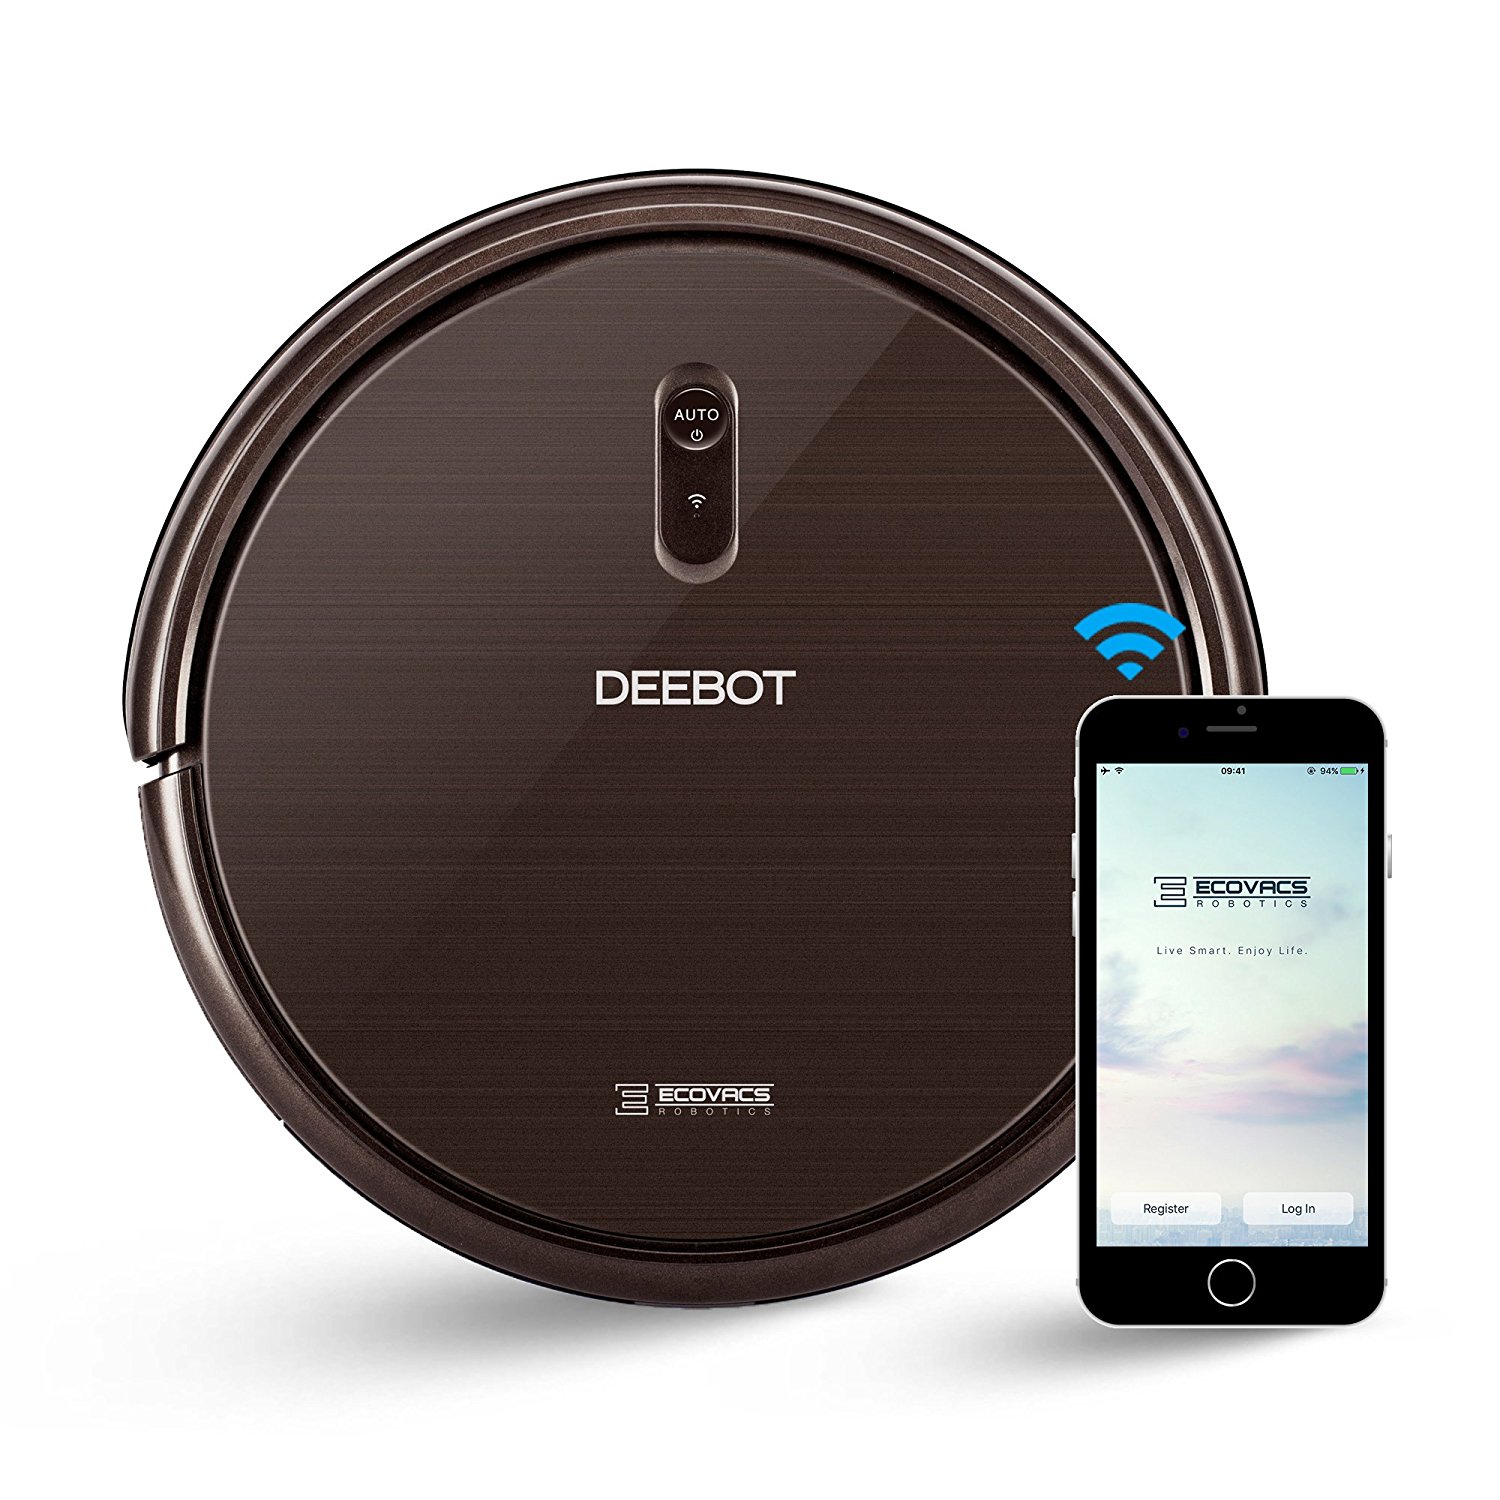 Ecovacs Deebot N79S robot vacuum cleaner for $140